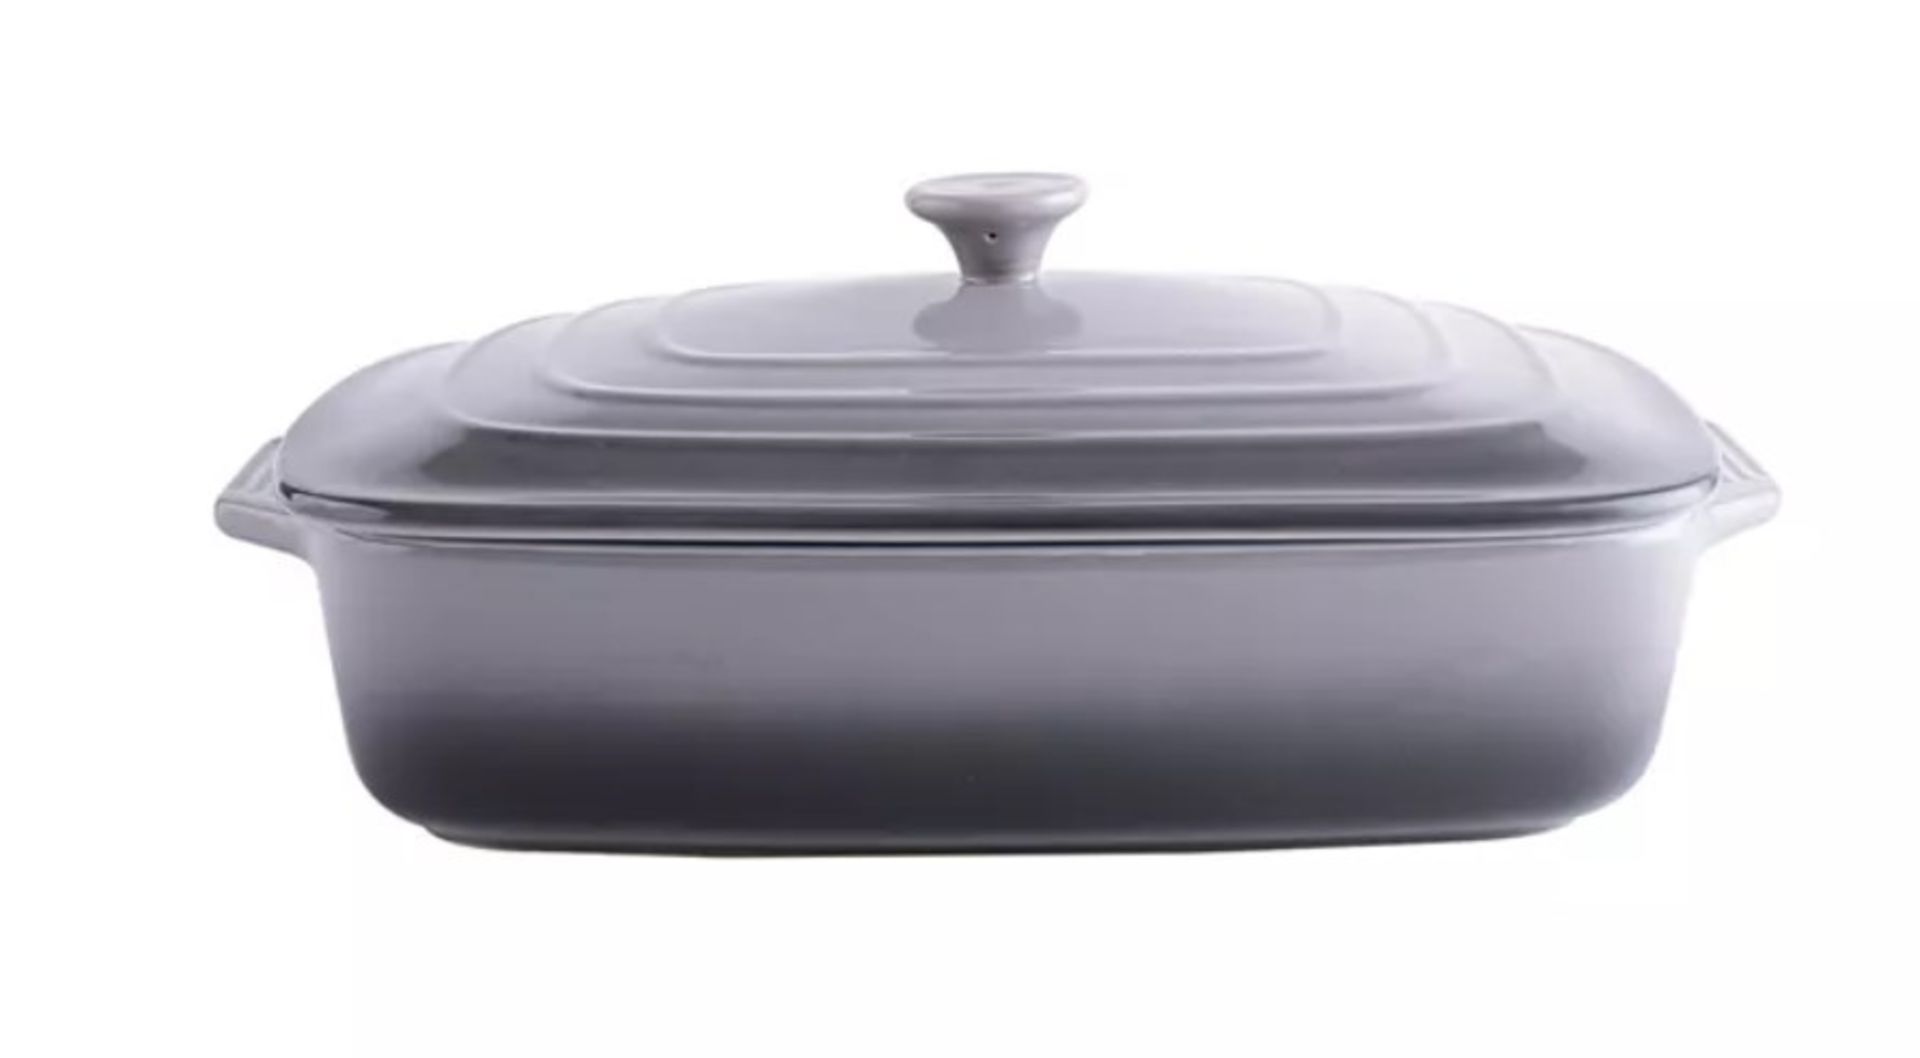 Description: (101/11B) Lot RRP Circa £100+ 15x Mixed Cooking Items To Include Baking Dish Sets